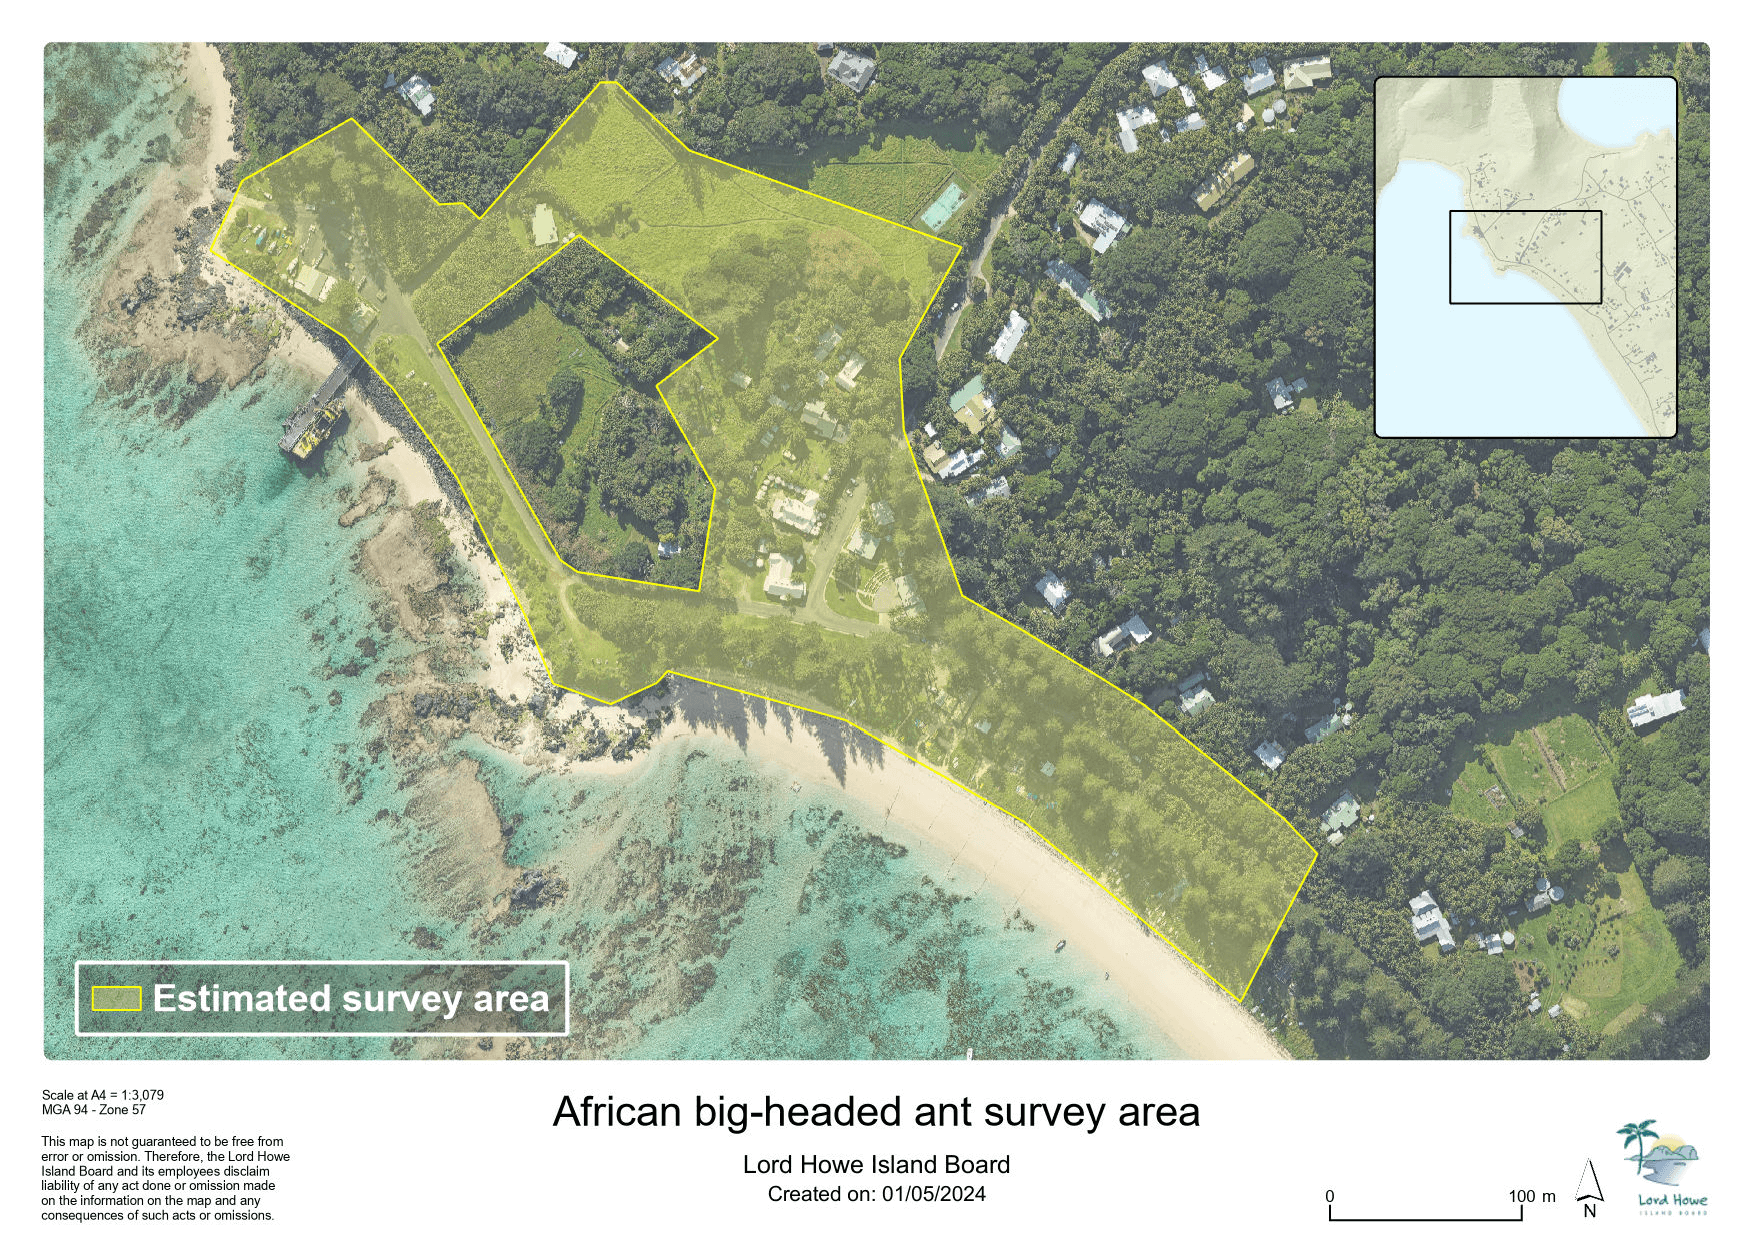 Map of settlement area on lord howe island